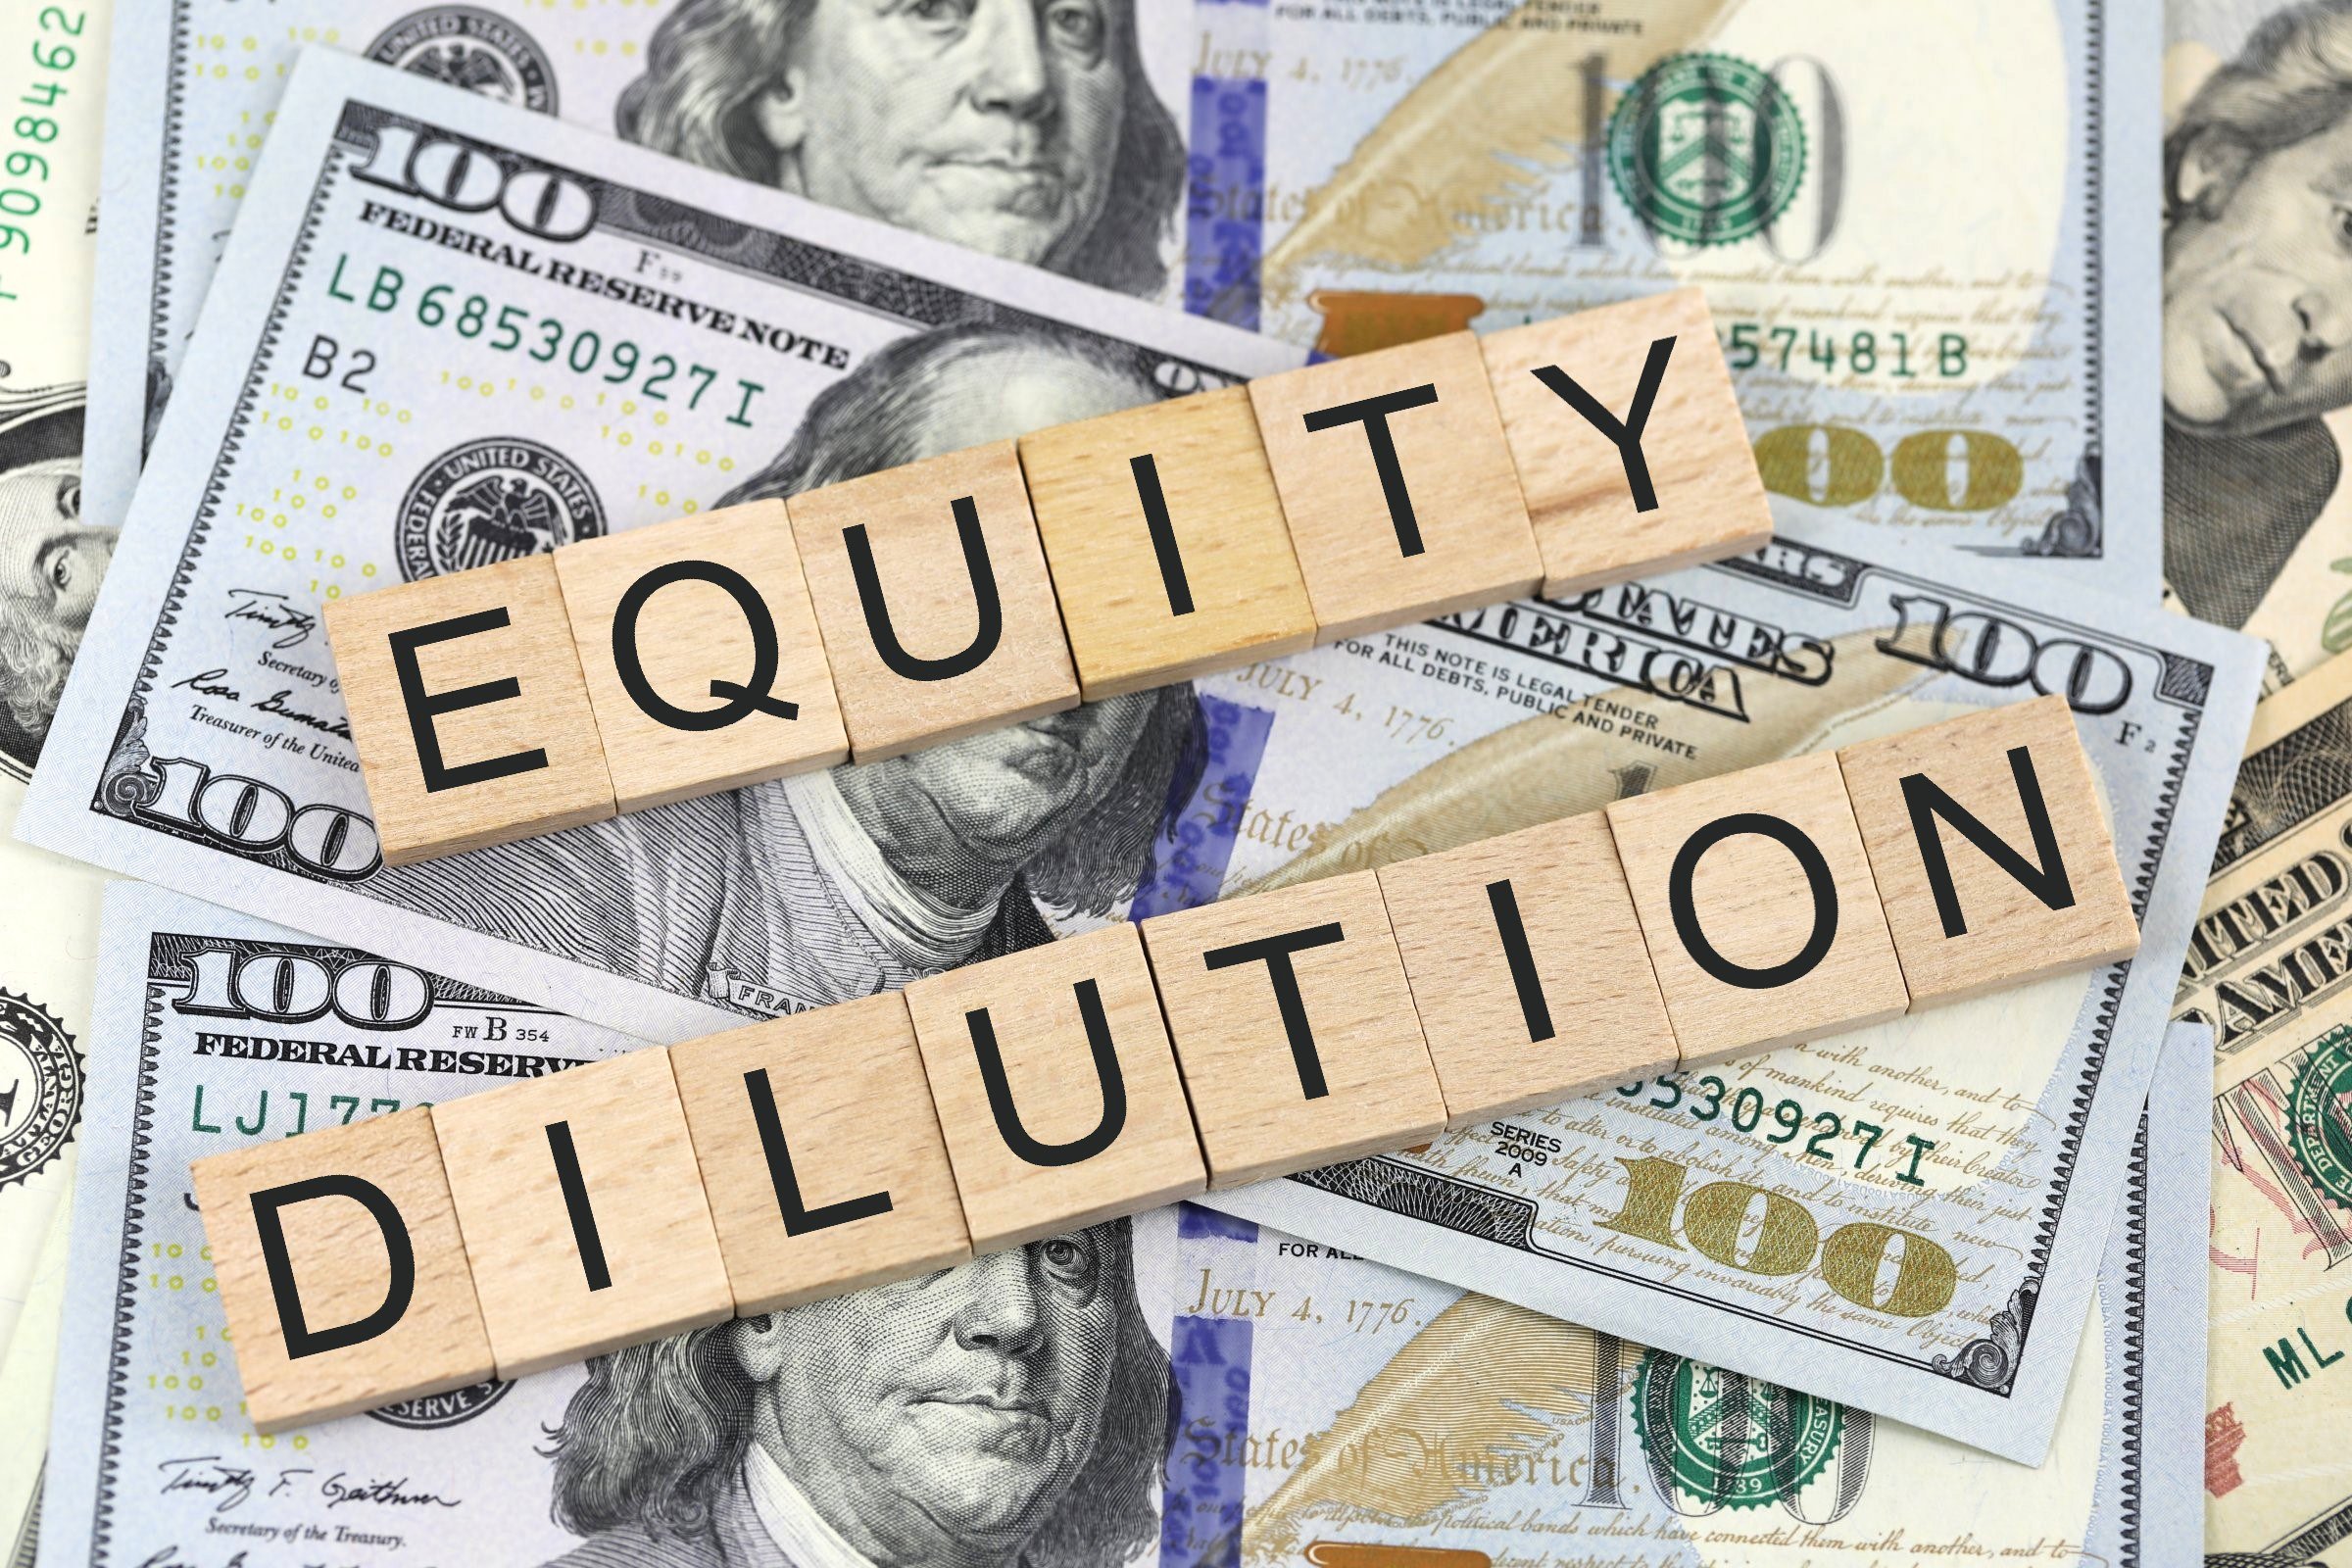 equity dilution